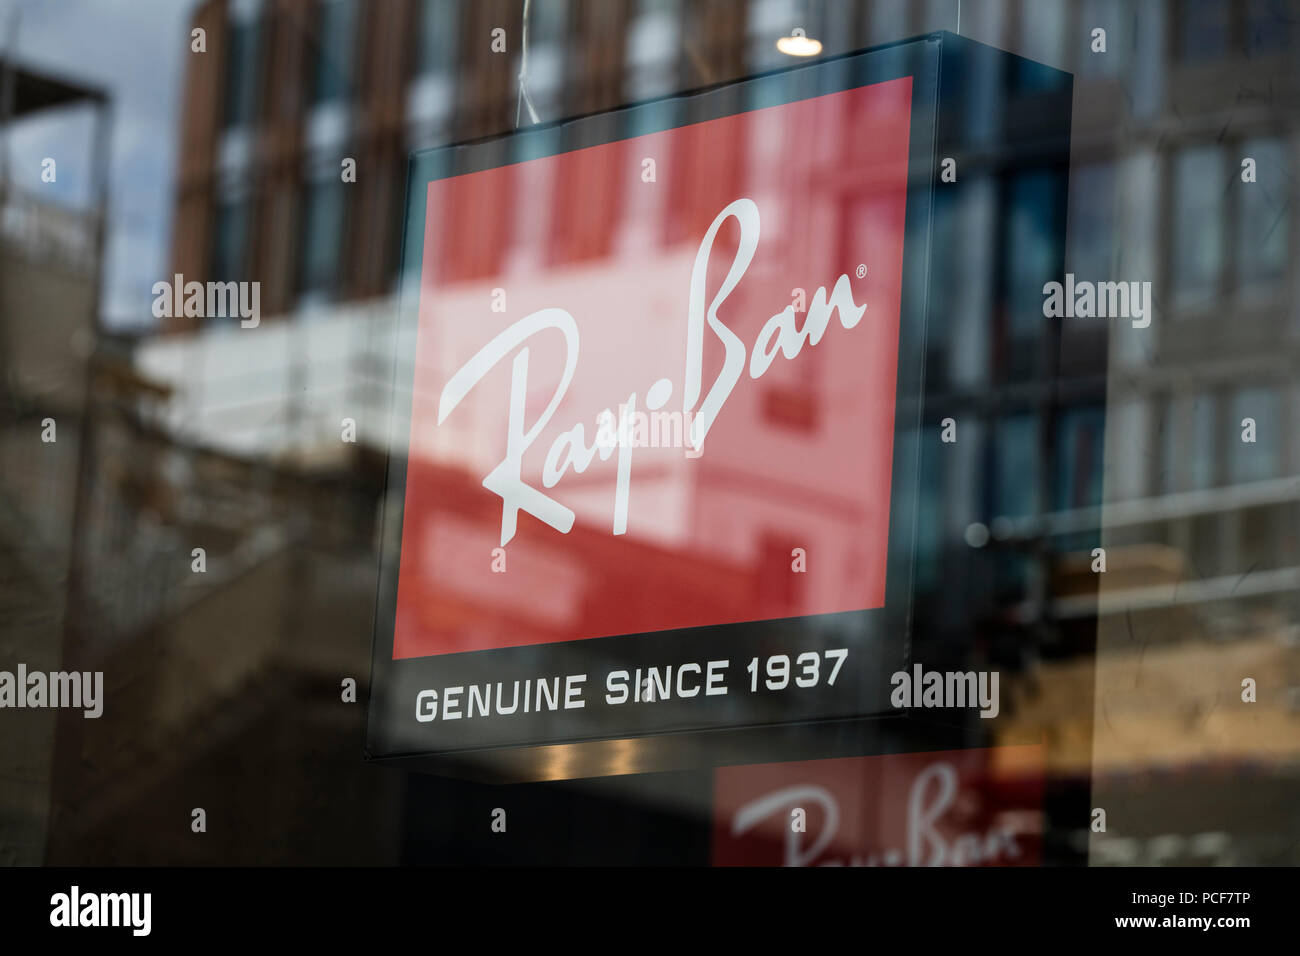 ray ban outlet london